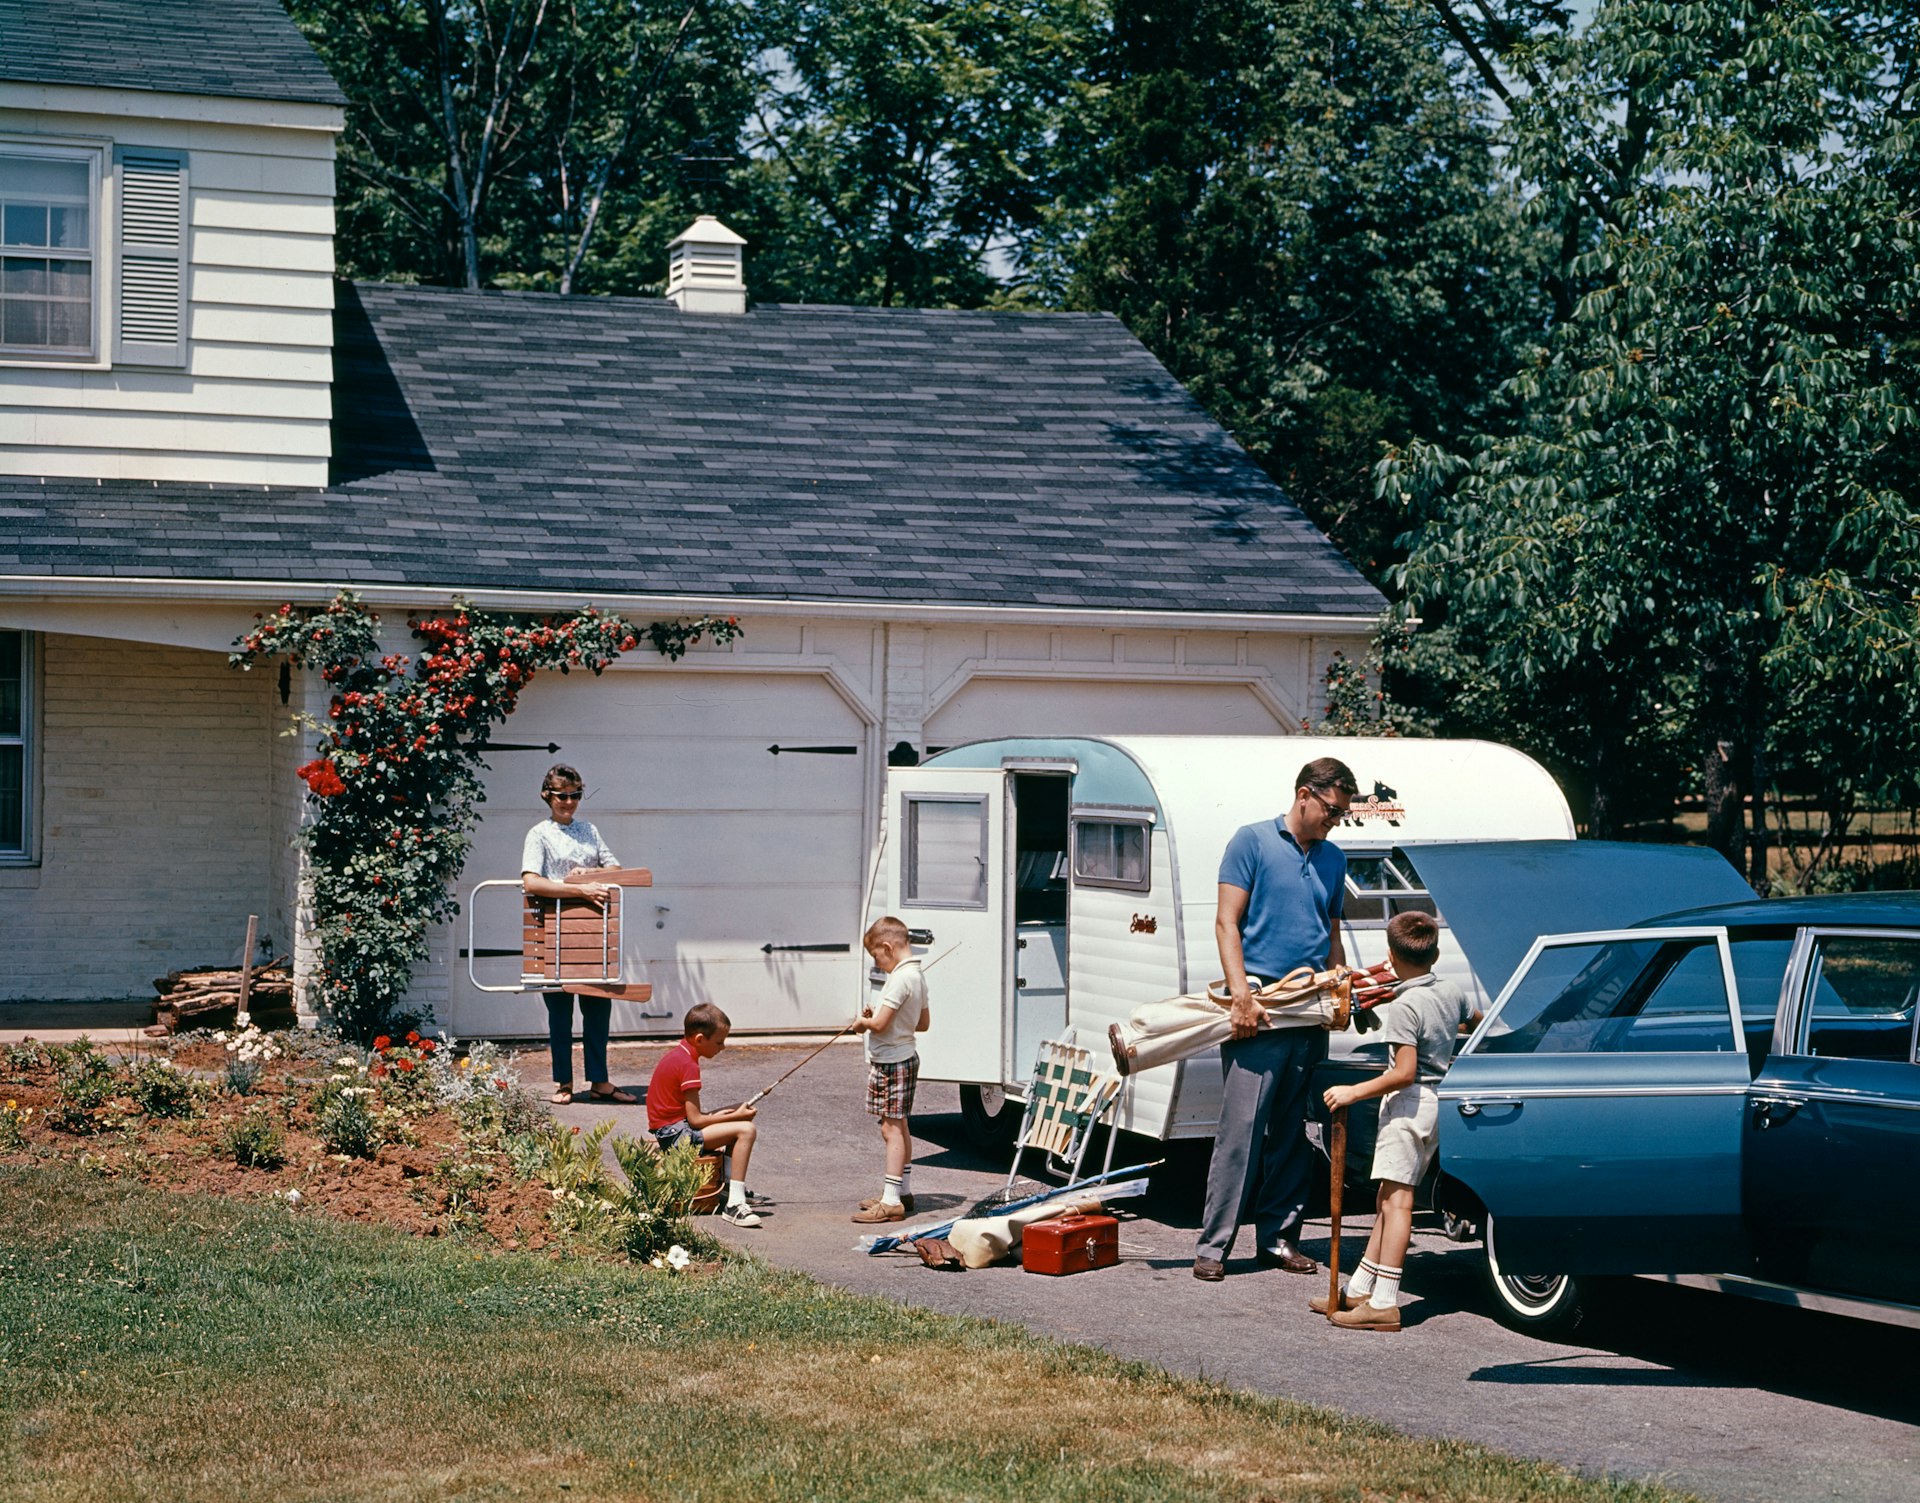 1960s FAMILY FATHER MOTHER SON DAUGHTER LOADING CAR AND TRAILER FOR VACATION SUMMER OUTDOOR